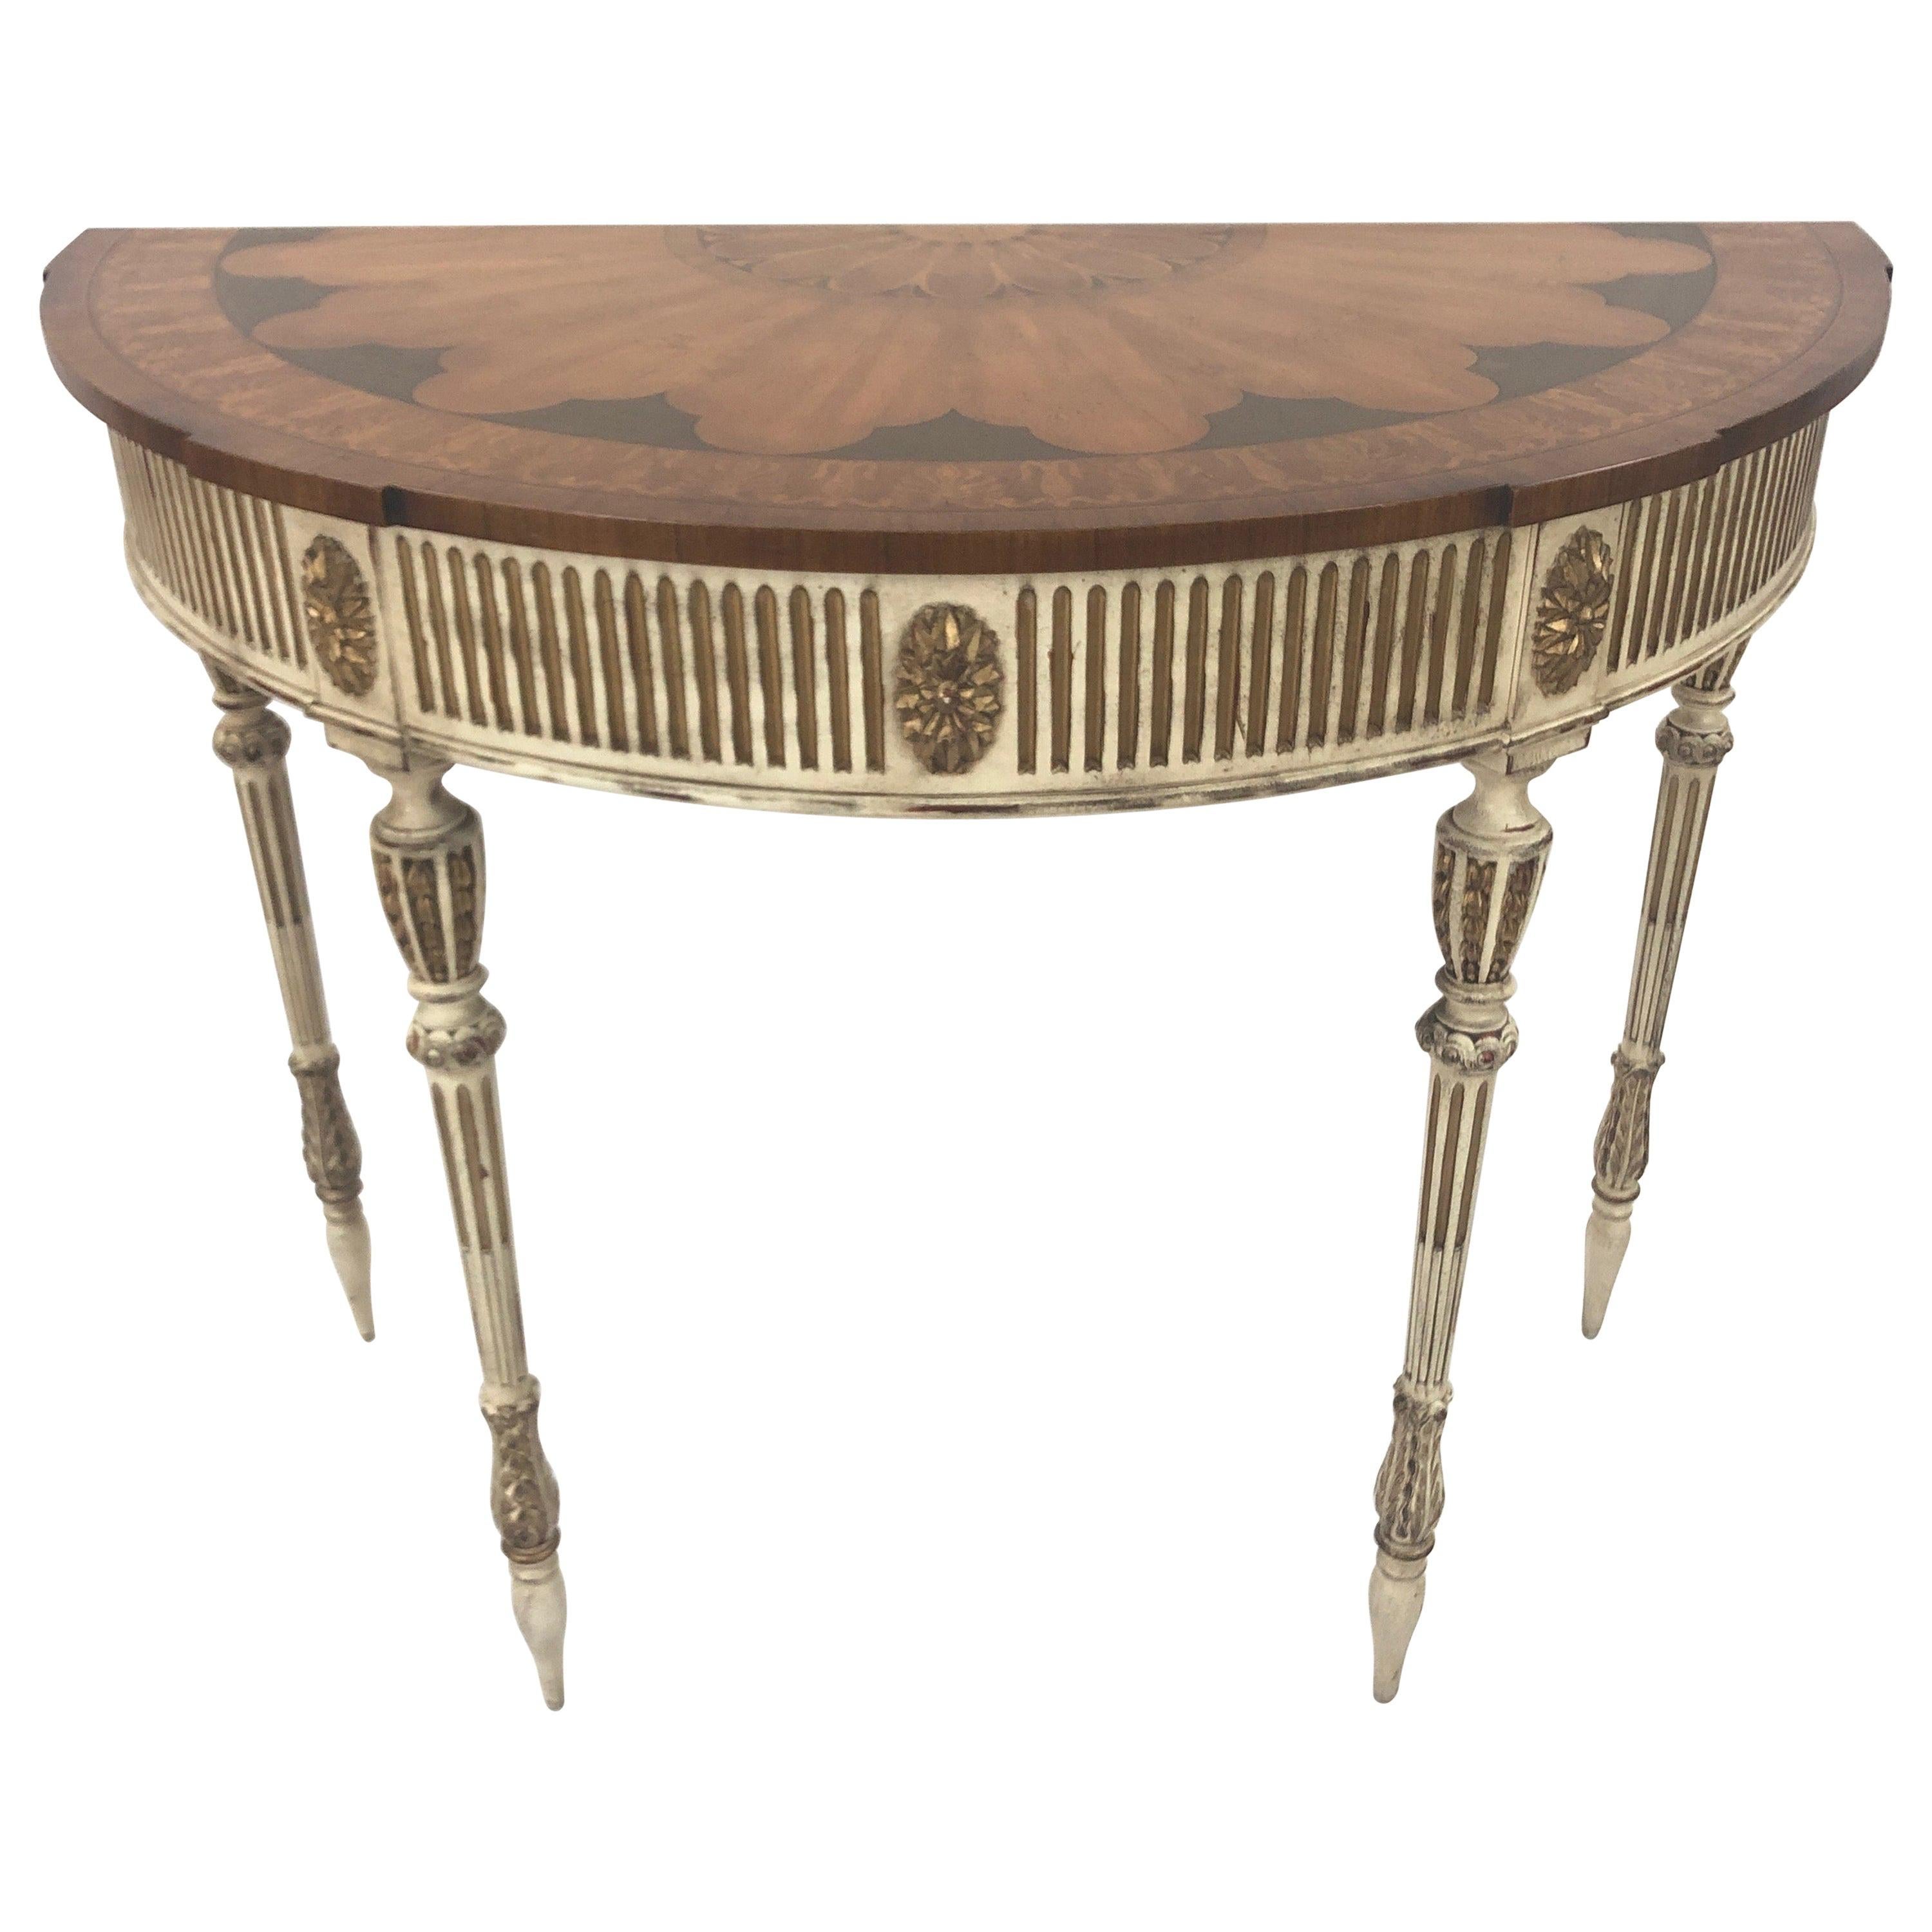 Sublimely Pretty Satinwood Inlay Painted and Gilded Demilune Console Table